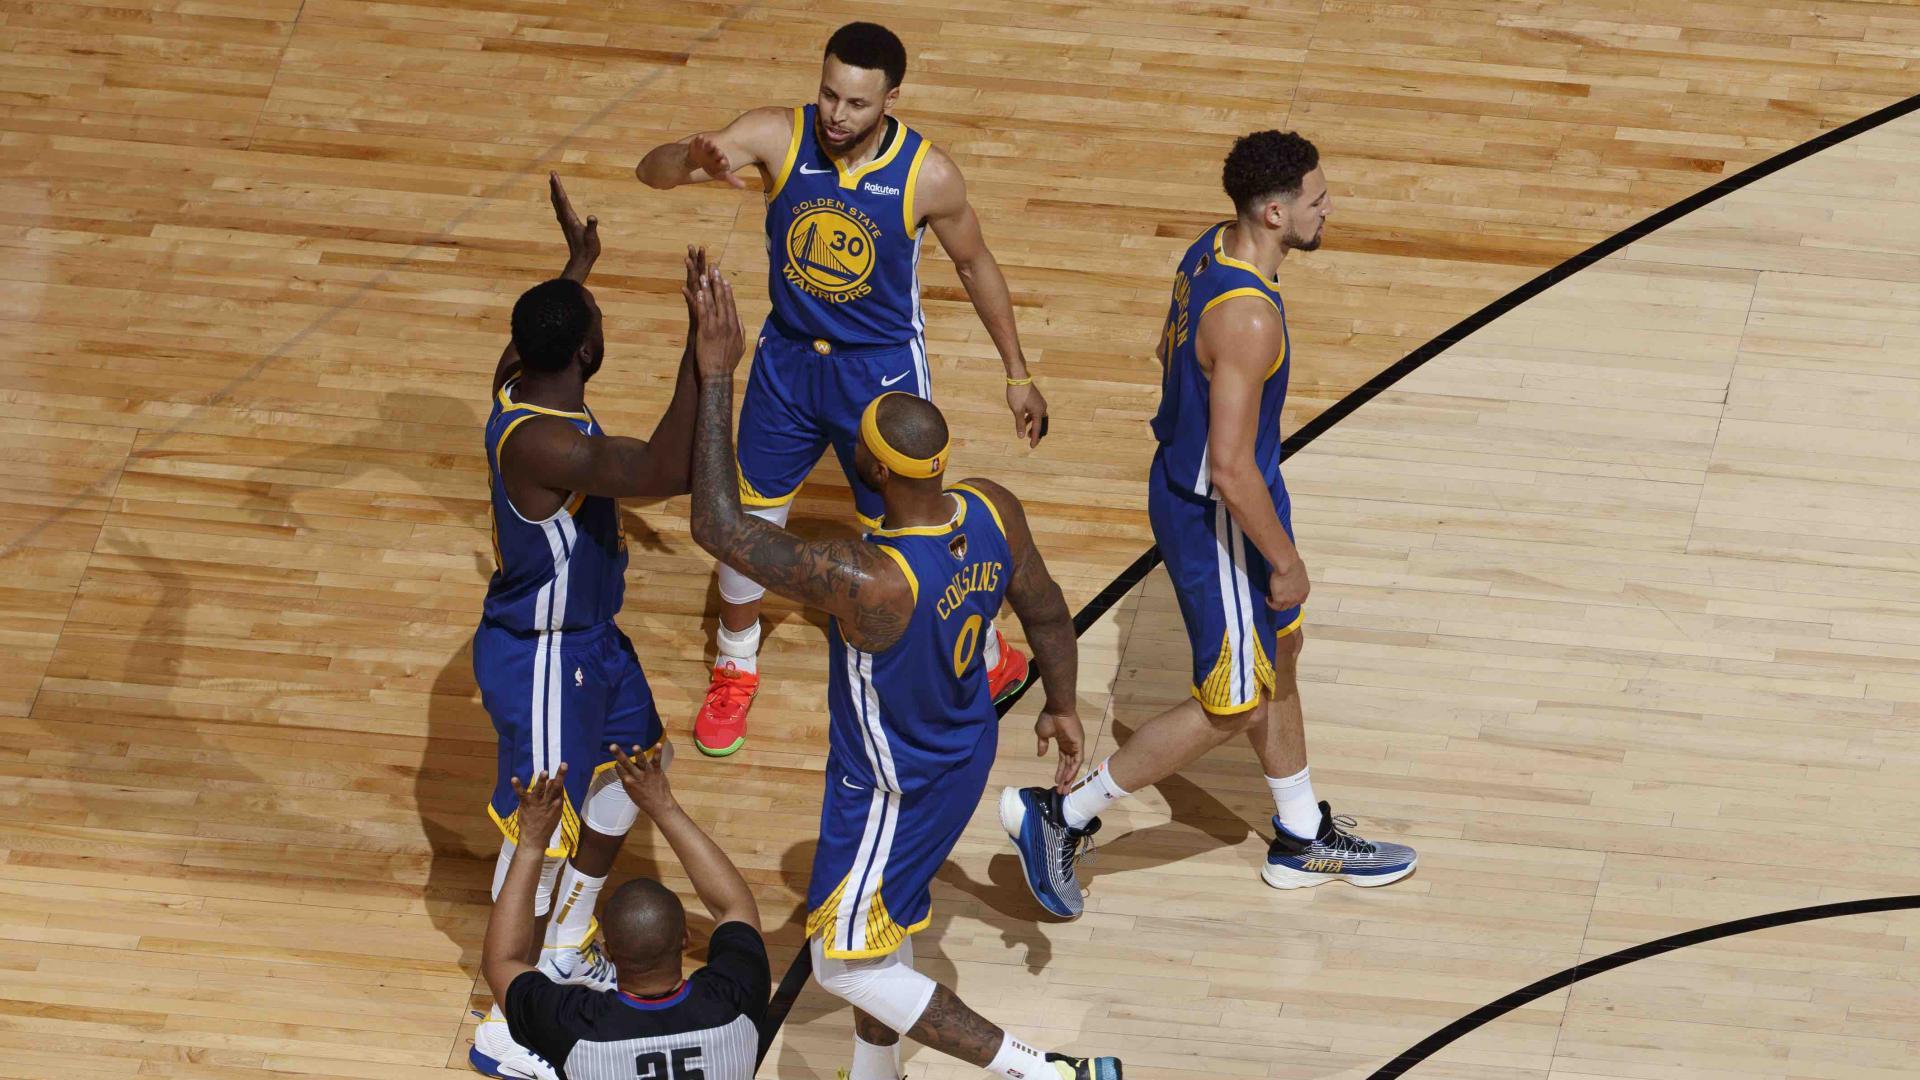 Despite injuries, Warriors pull a game 2 victory on the road